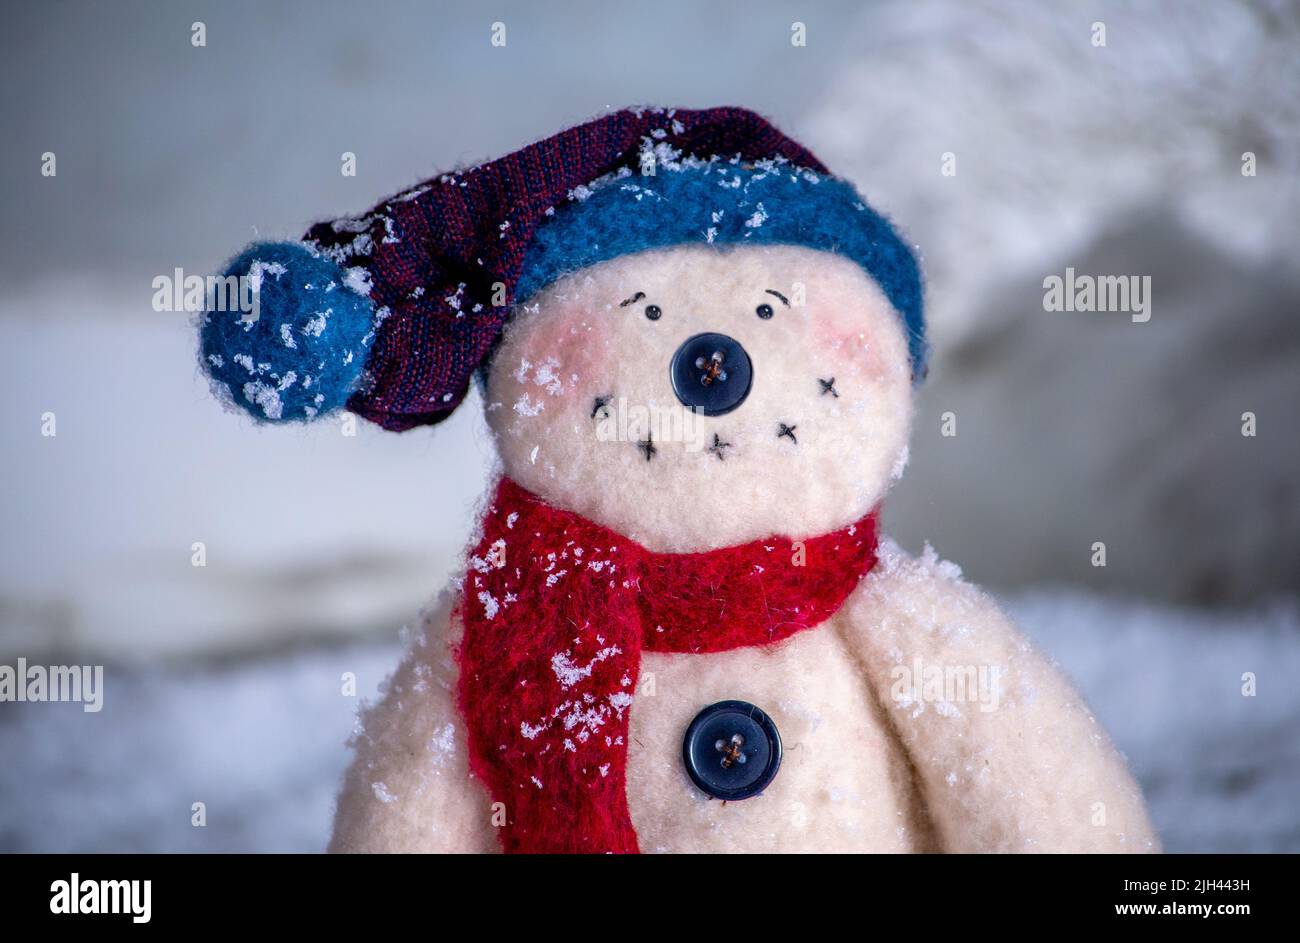 portrait of a smiling snowman with a button nose and a stocking cap Stock Photo